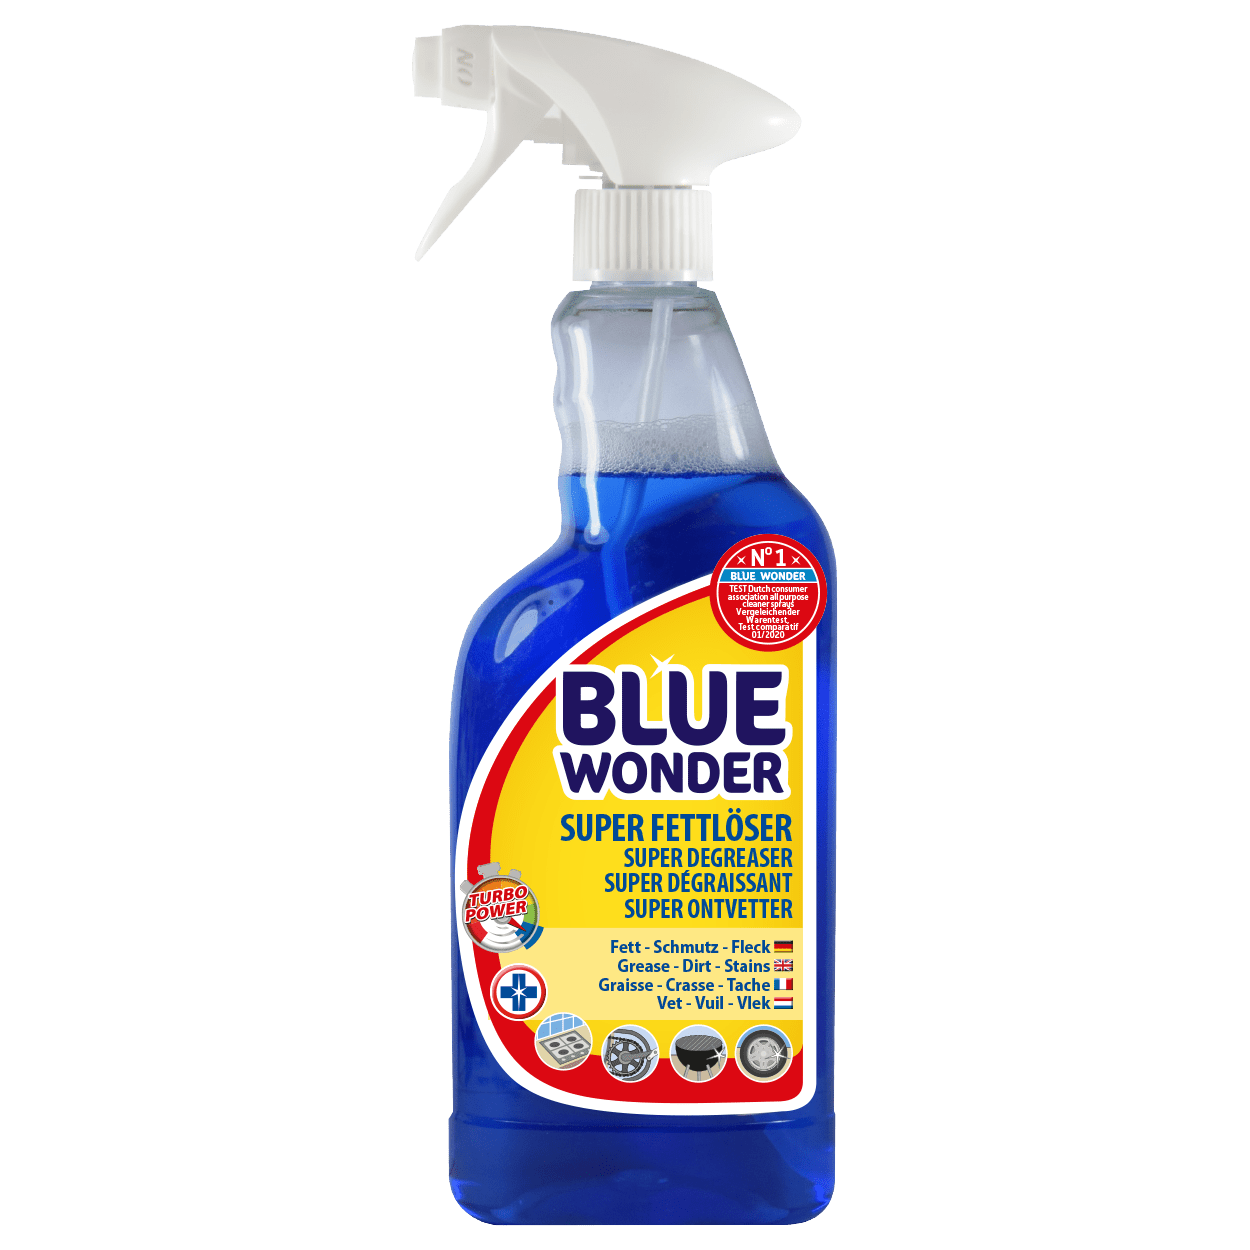 Powerful degreaser. Cleans ovens, hobs, countertops, extractor hoods, grill, pans, barbecue, engine gear and particularly dirty floors to name a few. Ready for use. Ideal for heavy-duty cleaning jobs.